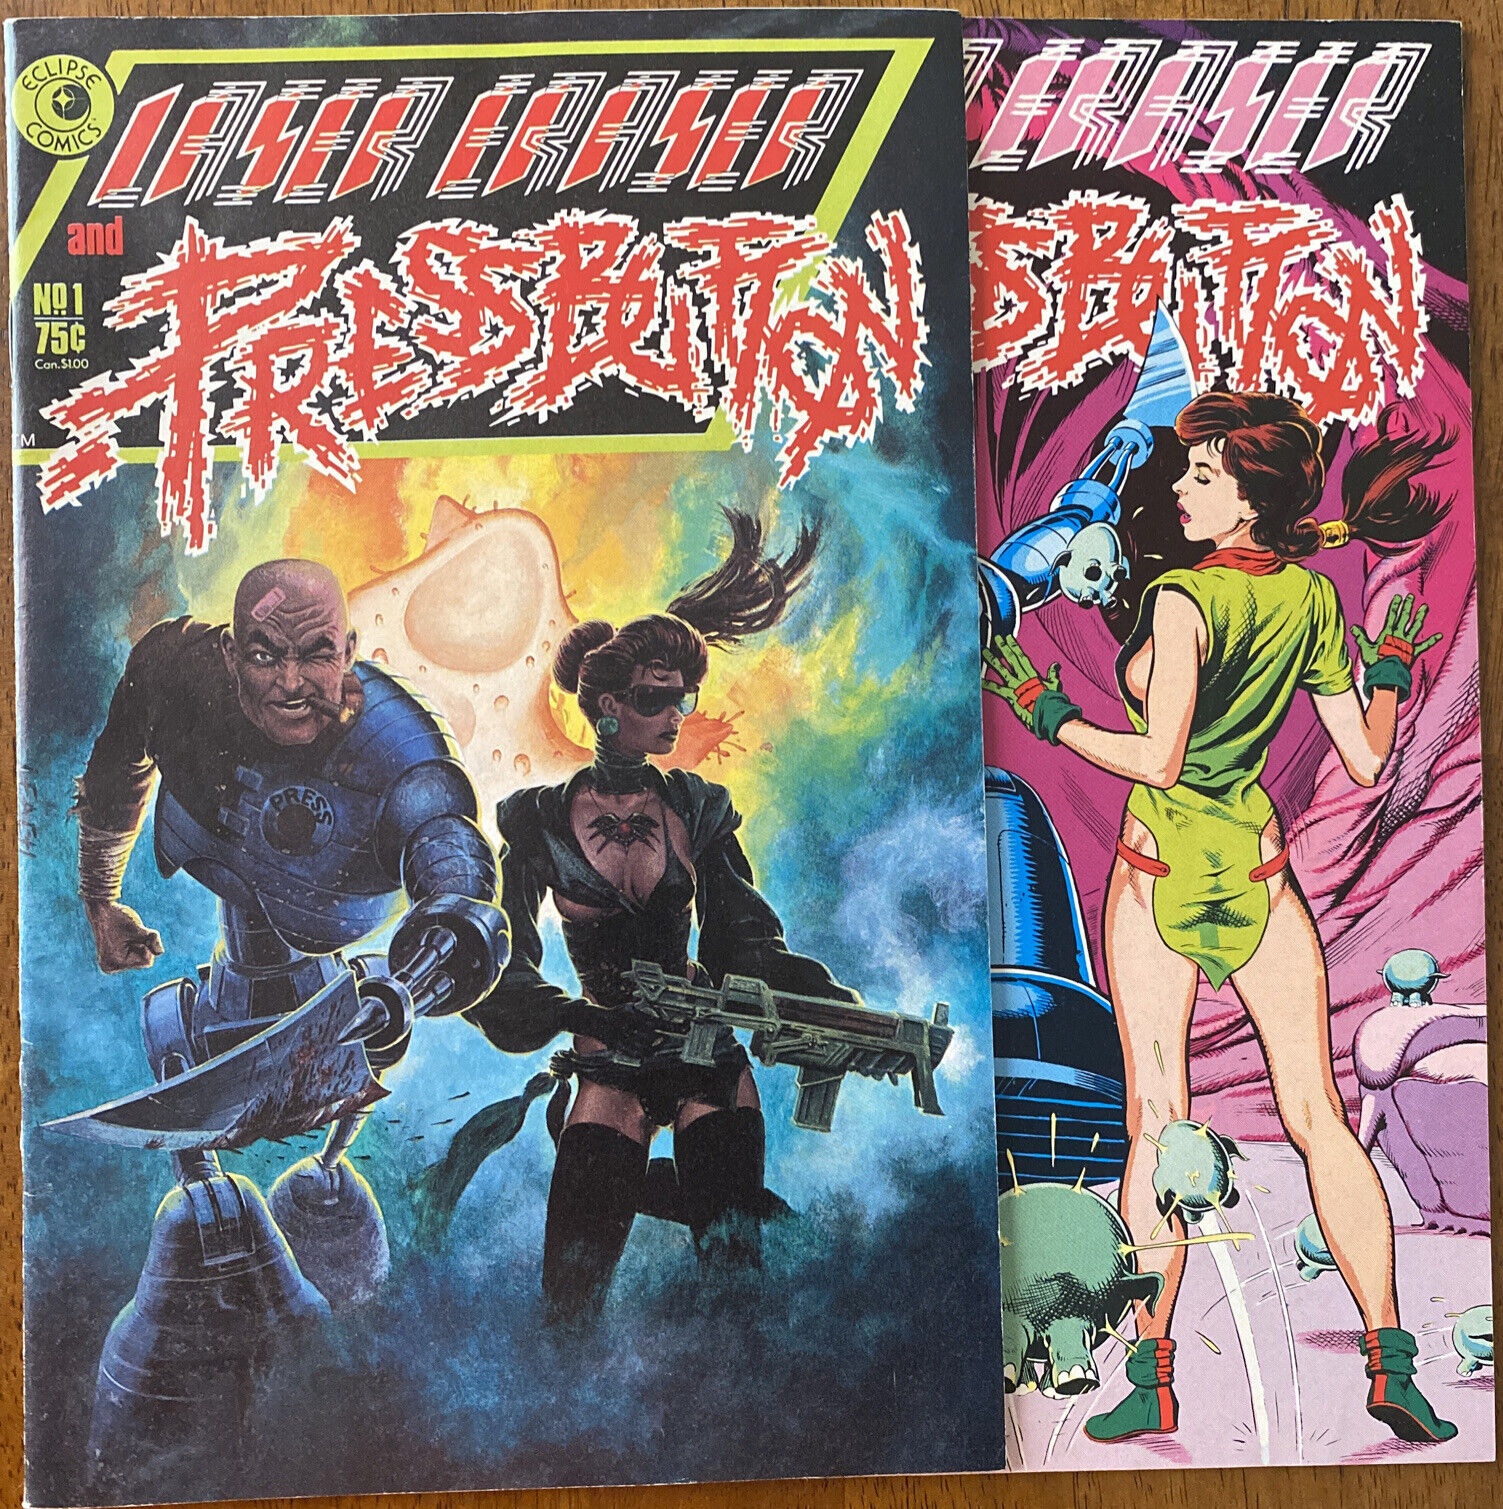 Laser Eraser and Press Button #1 - 2 Eclipse Comics 1985 (2 Issues)